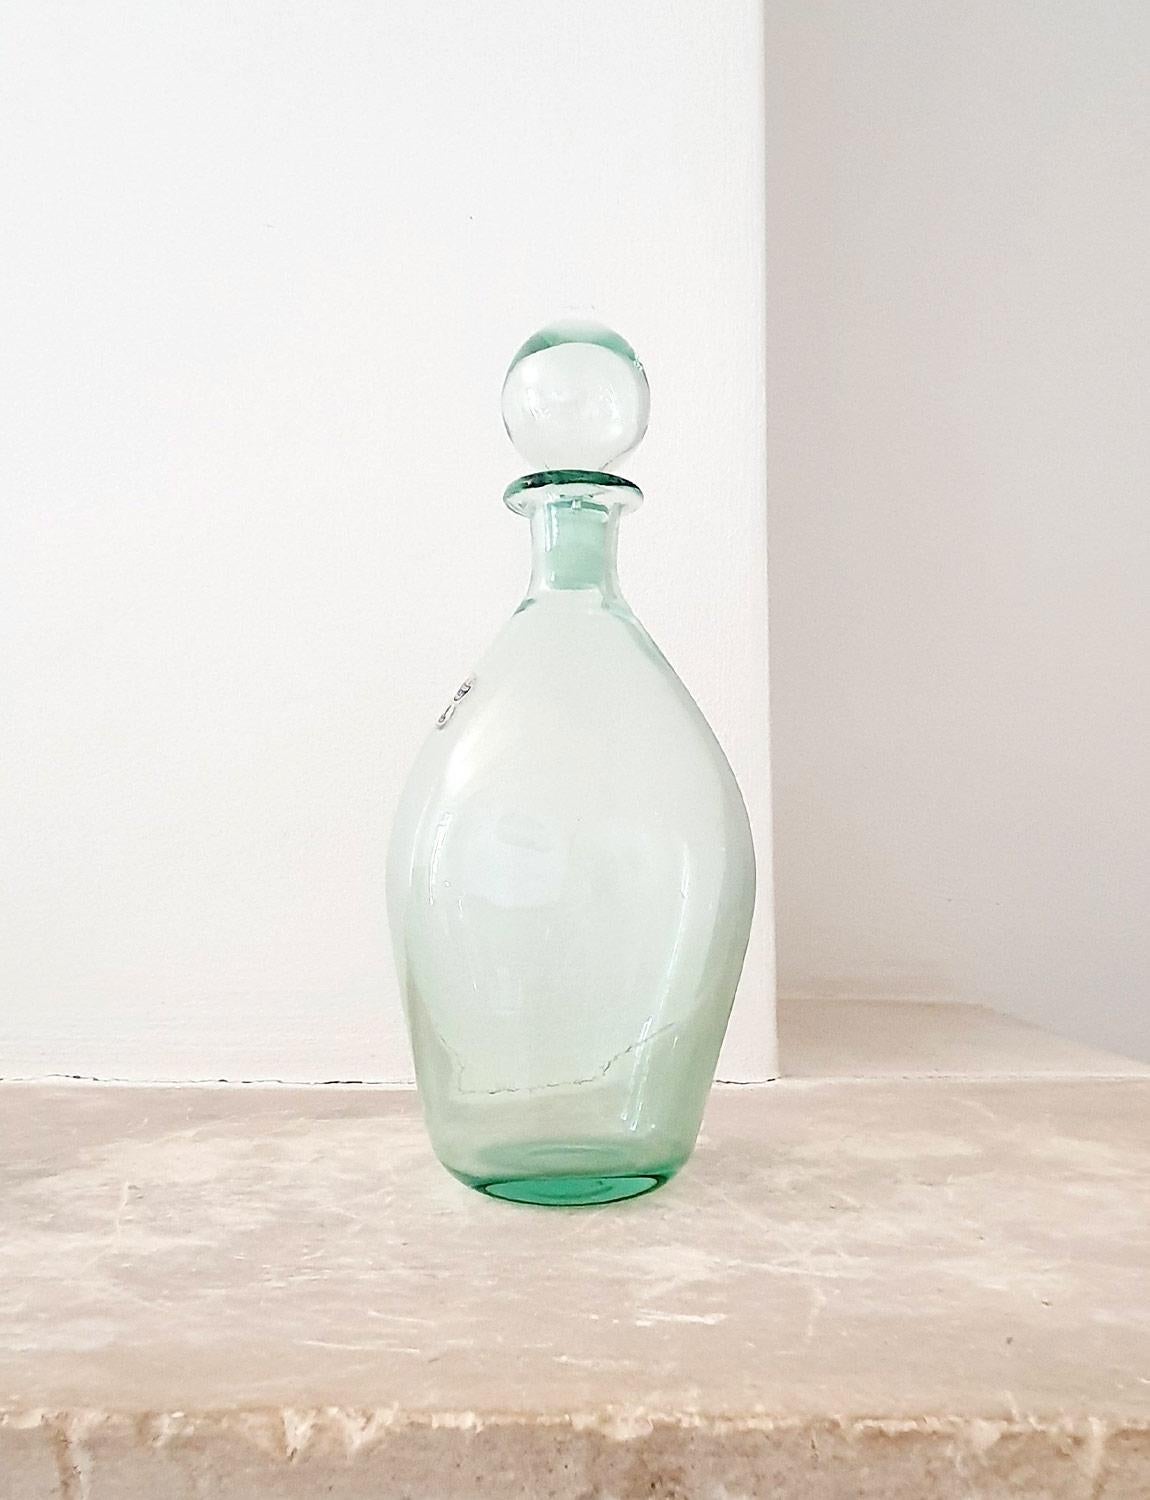 A beautifully light and clear pale green hand-blown bottle / decanter with hand-blown stopper by the Venetian furnace, Nason Moretti. The bottle still carries the Nason Moretti sticker. It is a beautiful piece in excellent condition.